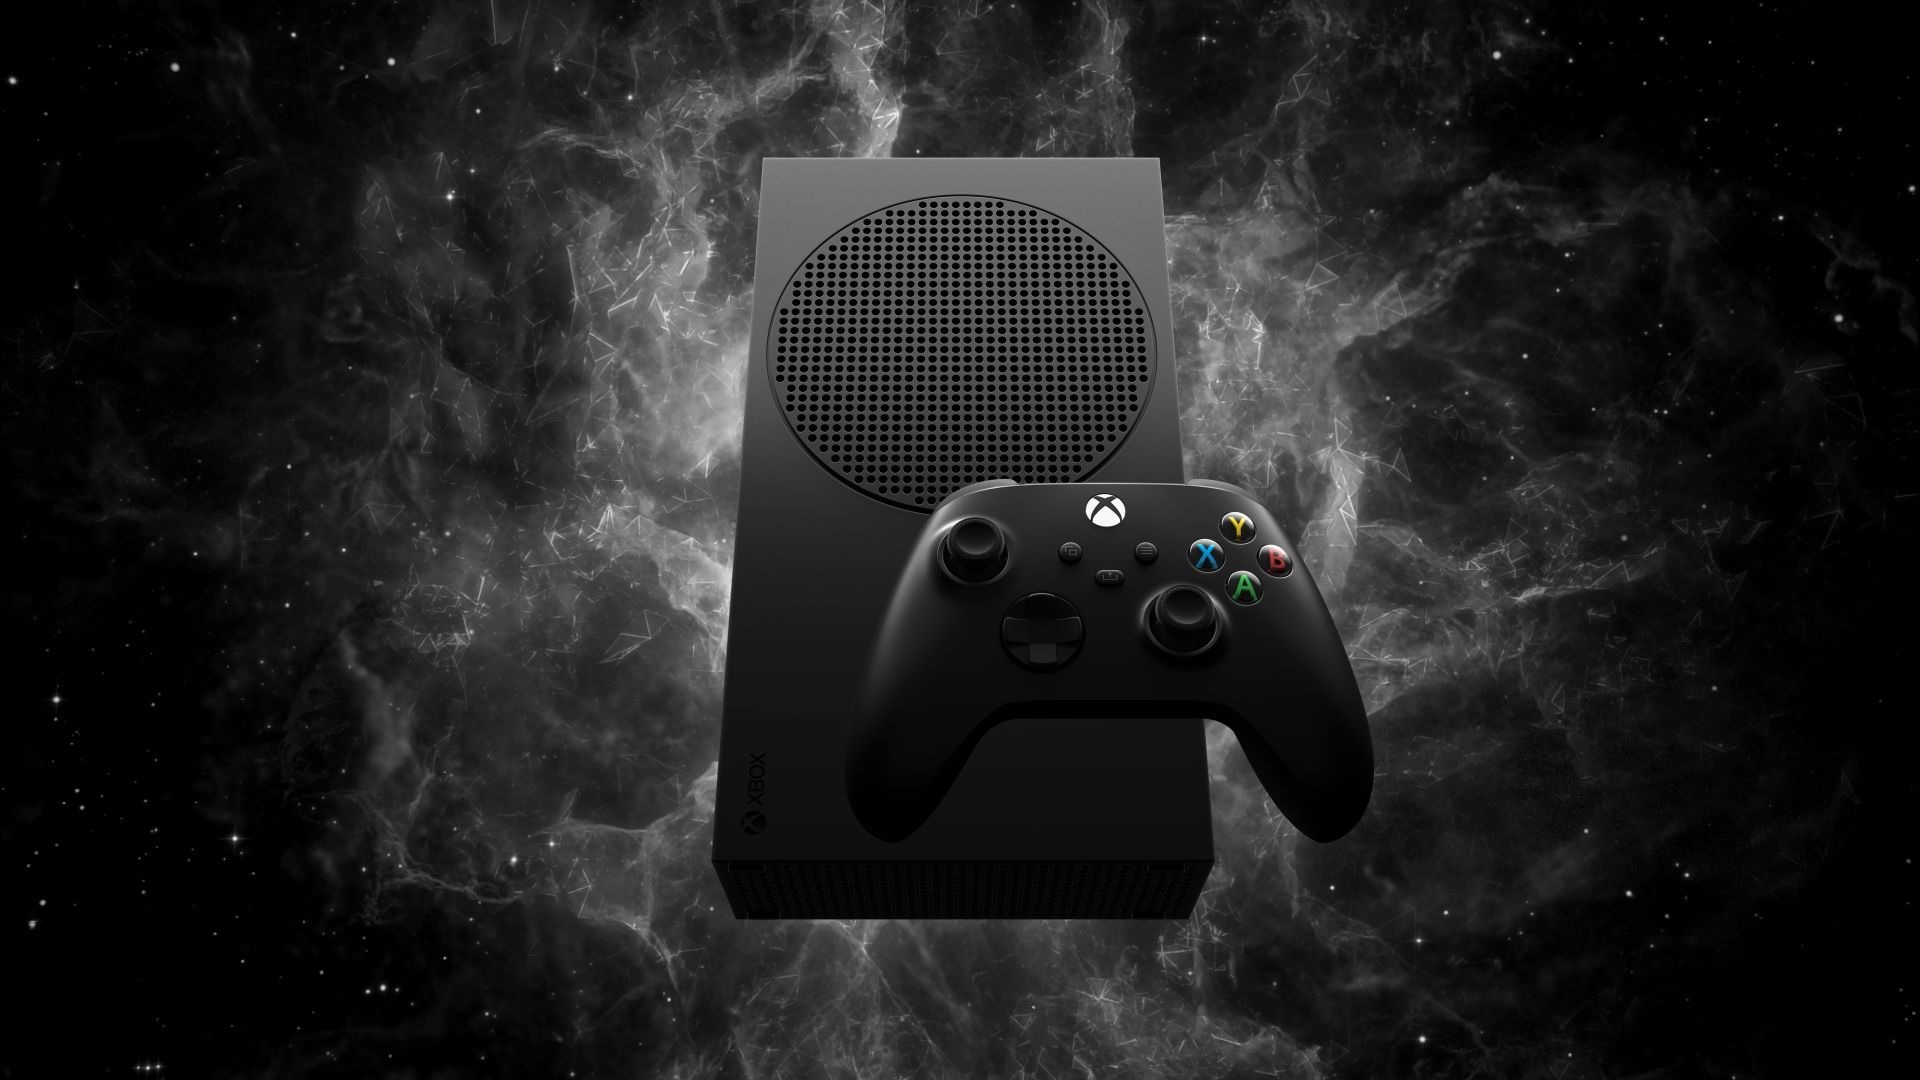 More than a million Xbox One consoles sold on launch day